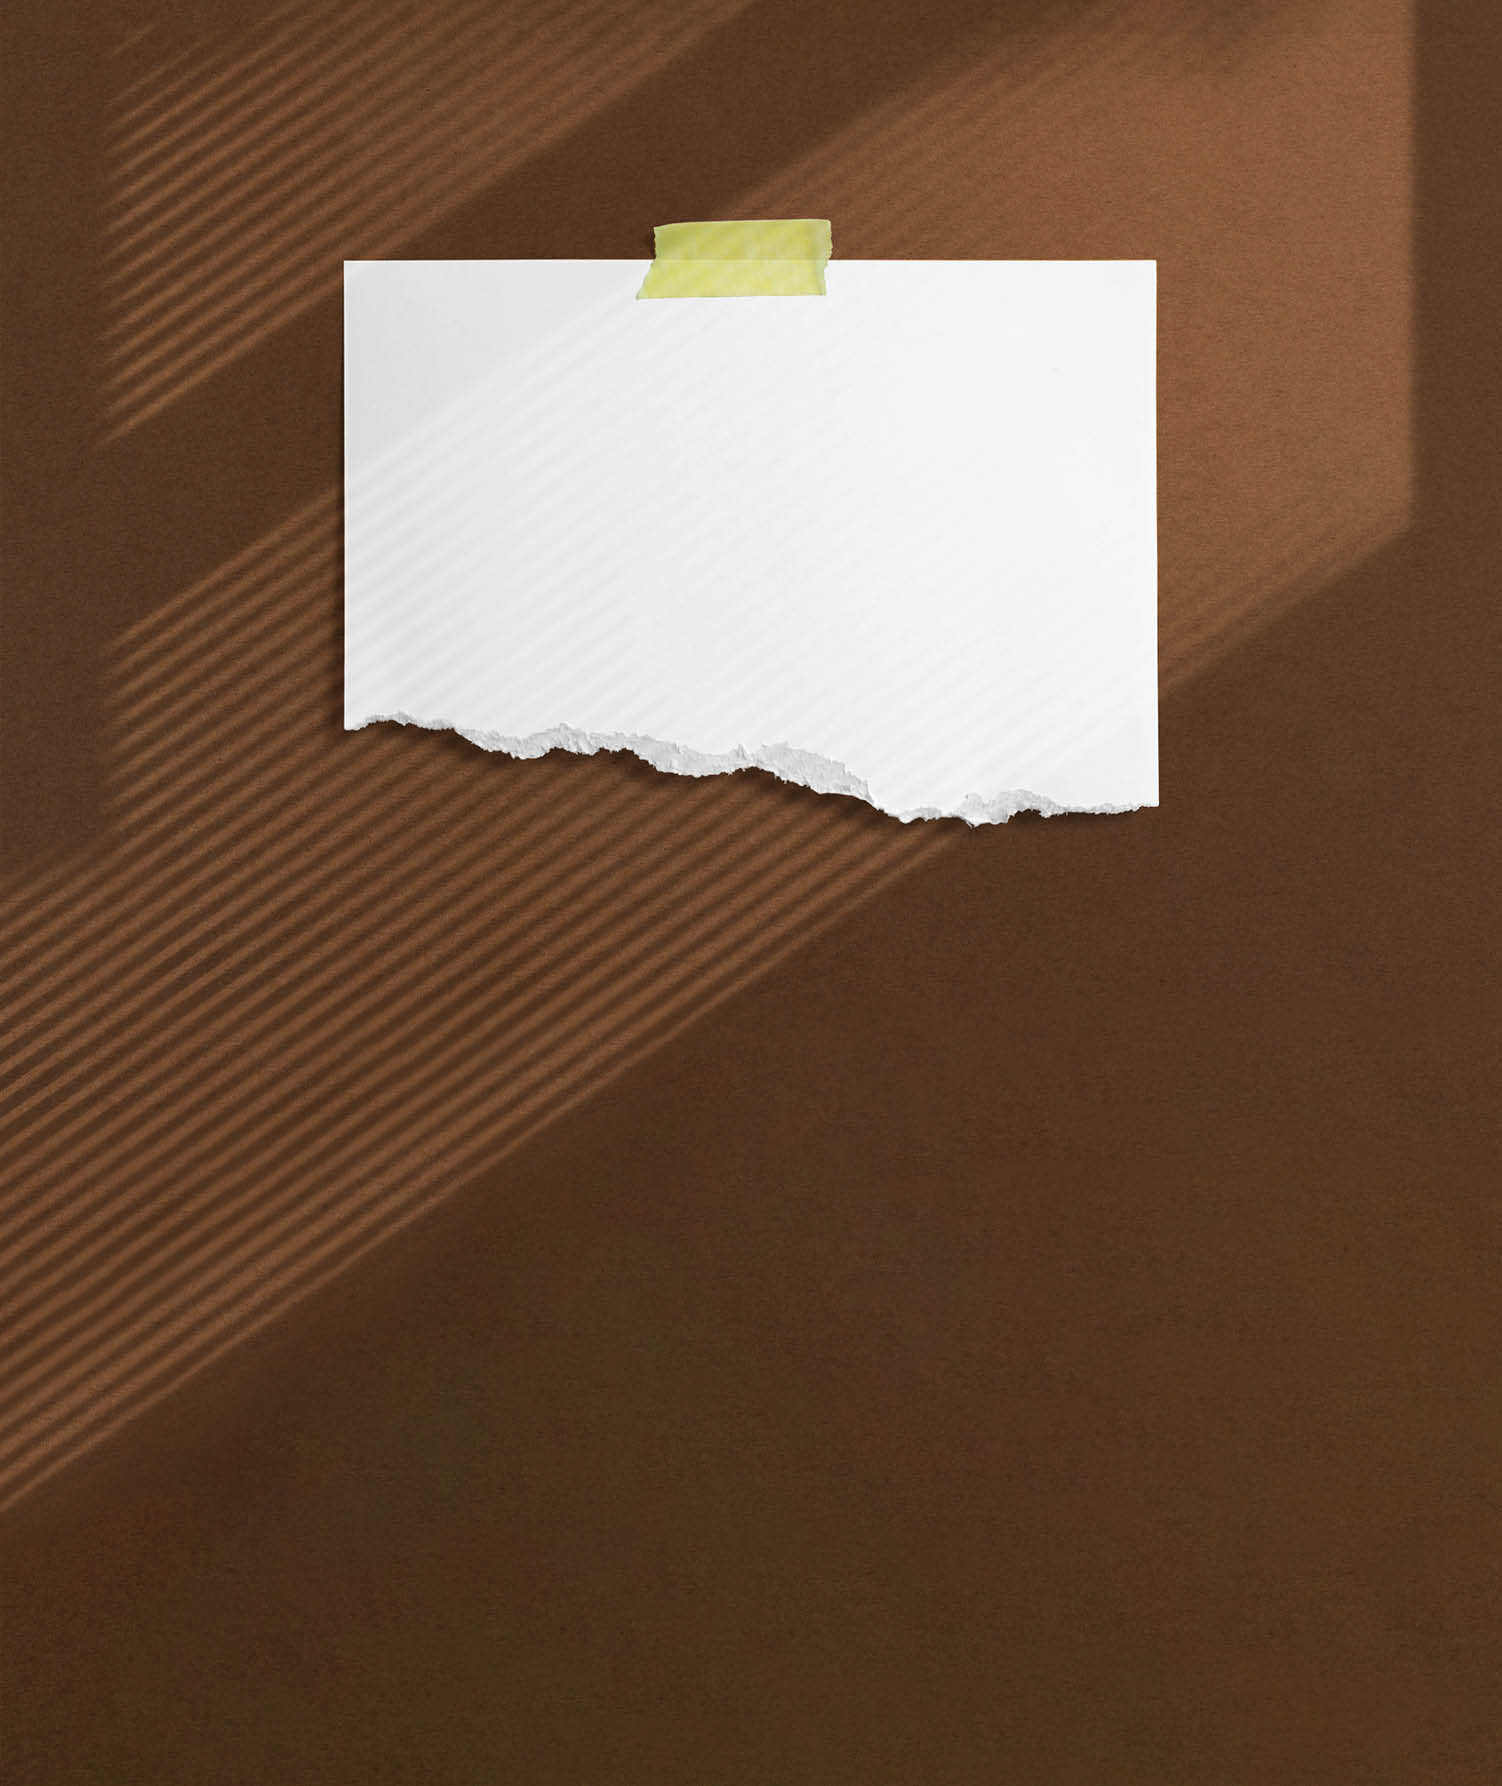 Blank torn paper frame glued with adhesive tape to brown textured wall with soft window shadows adobe as template for graphic designers presentations, portfolios etc.